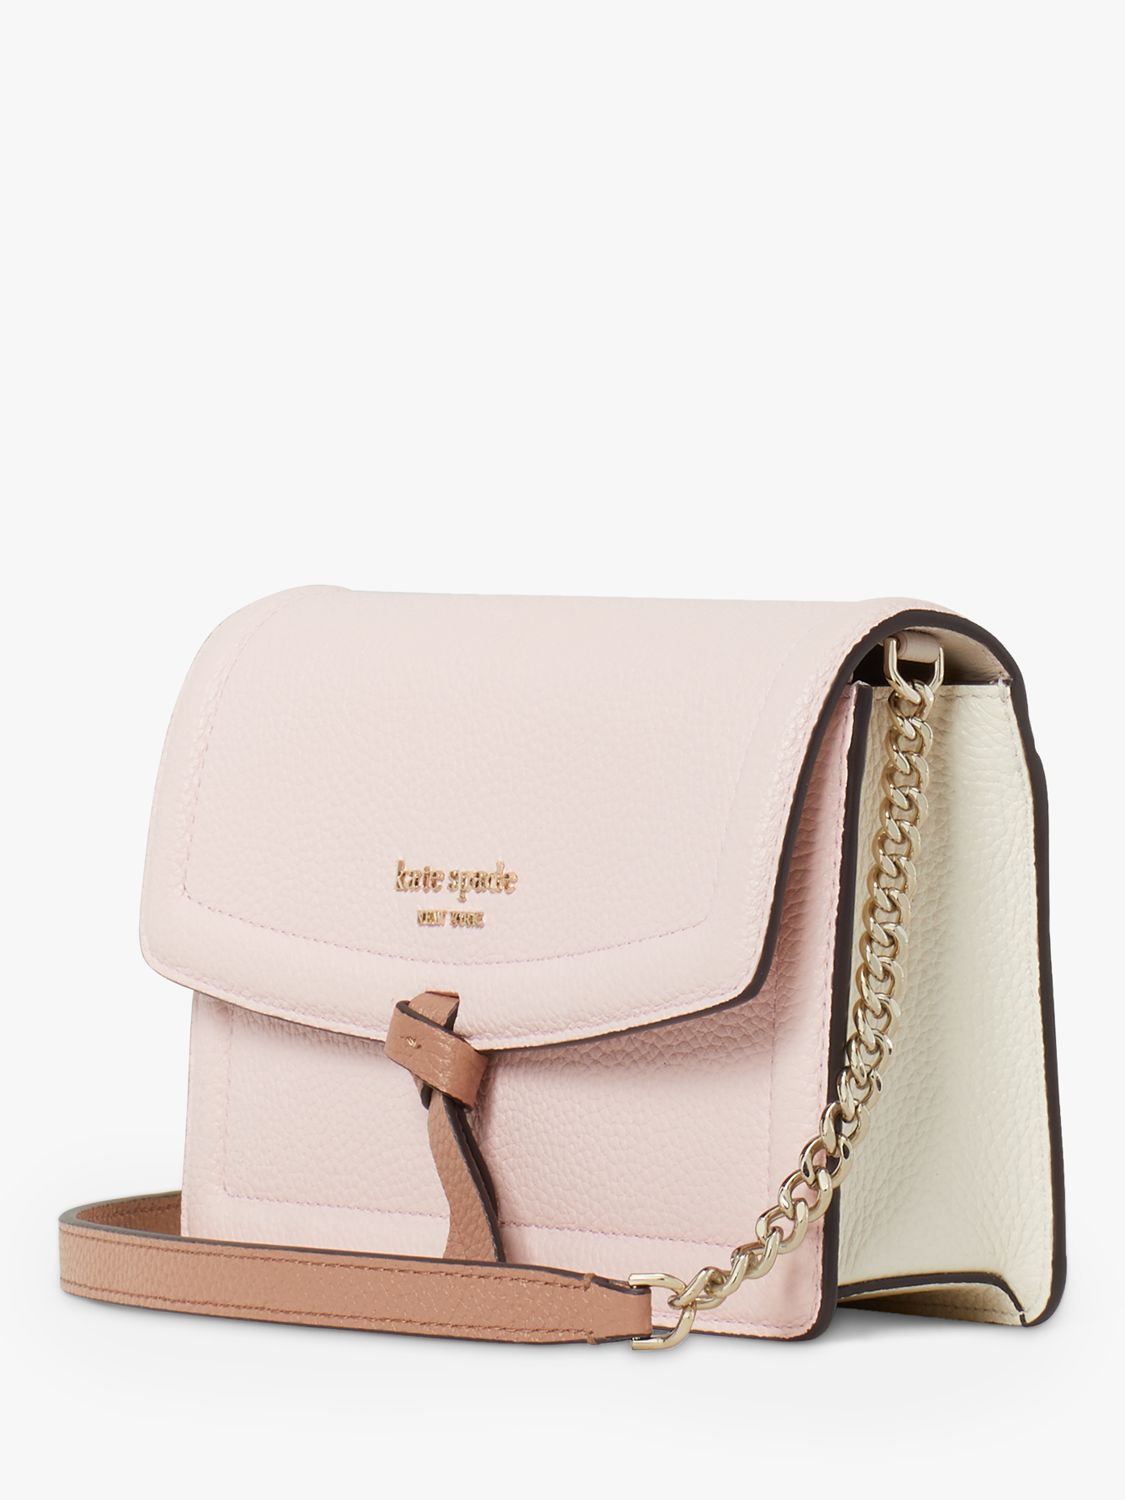 kate spade new york Knott Leather Chain Cross Body Bag, Chalk Pink at ...